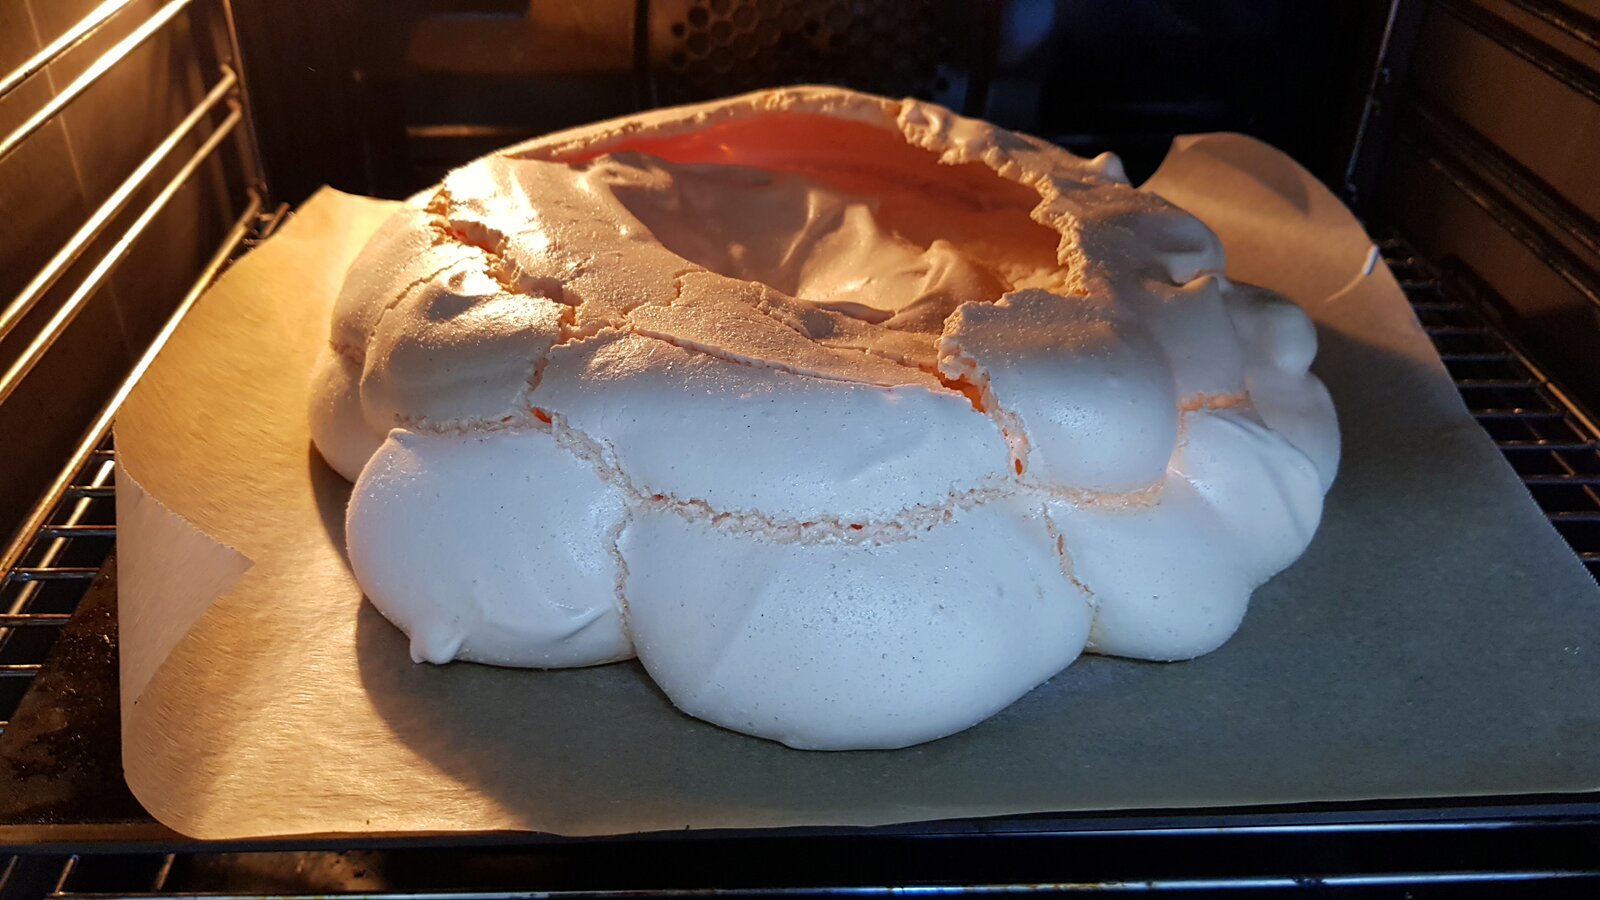 The pavlova cooked